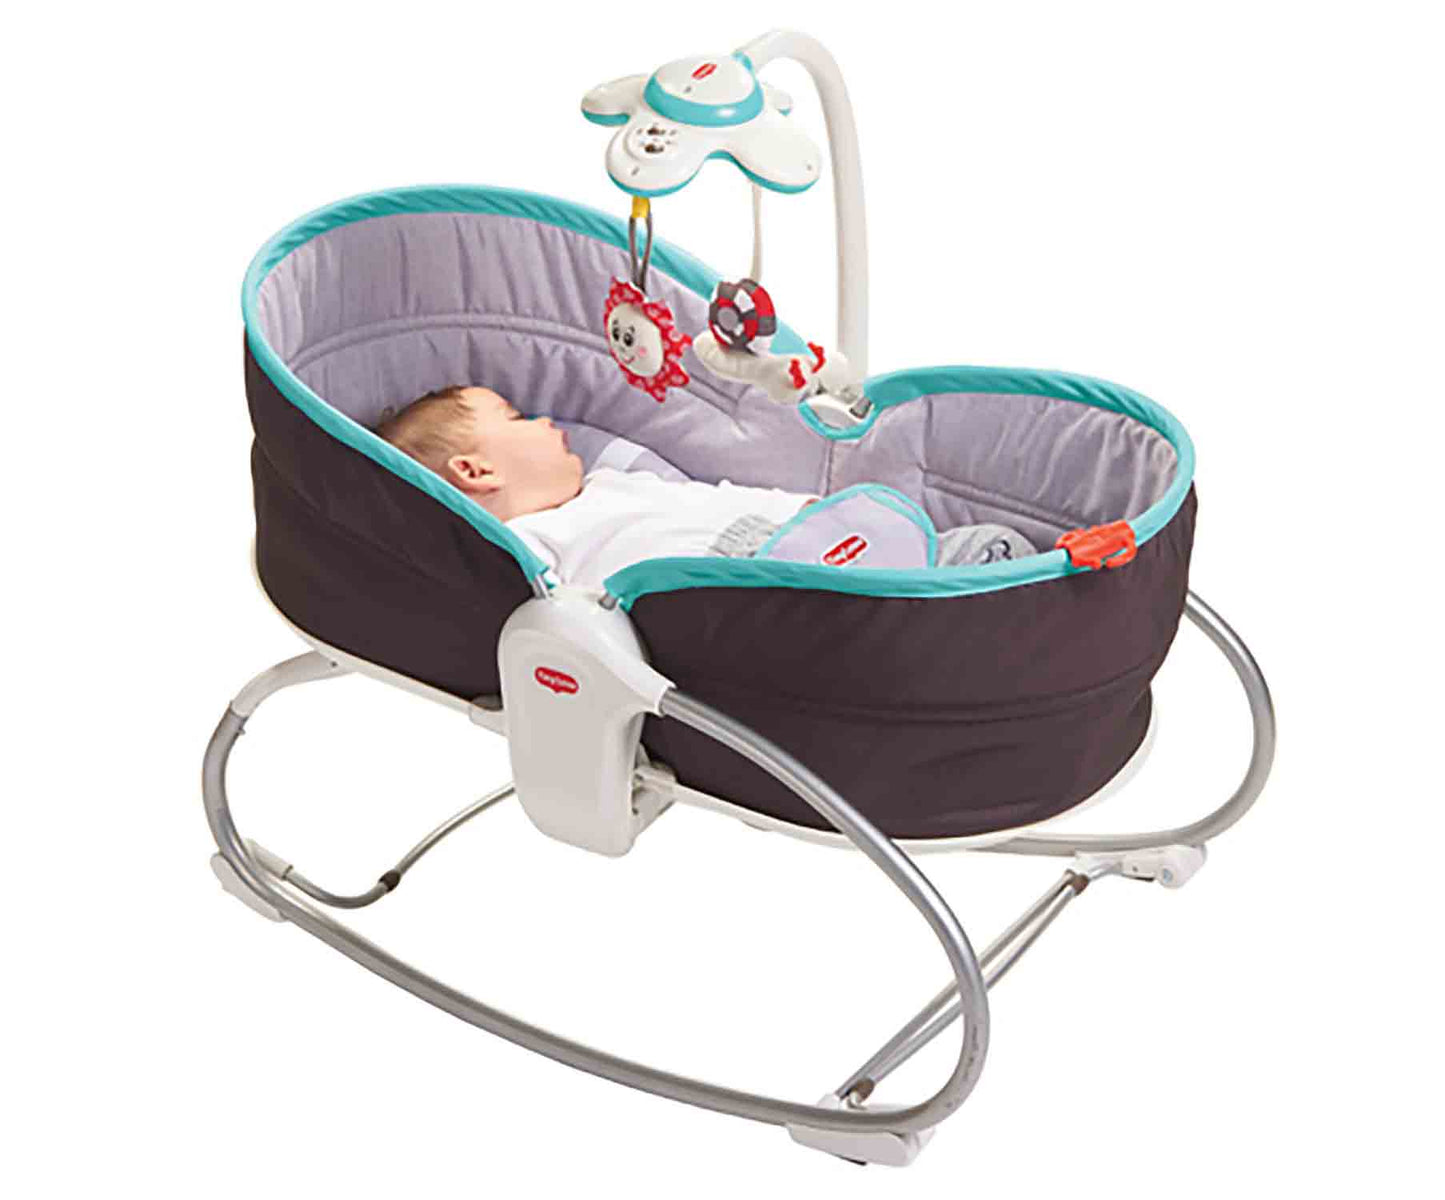 3-In-1 Rocker Napper~Turquoise(Without Packing)